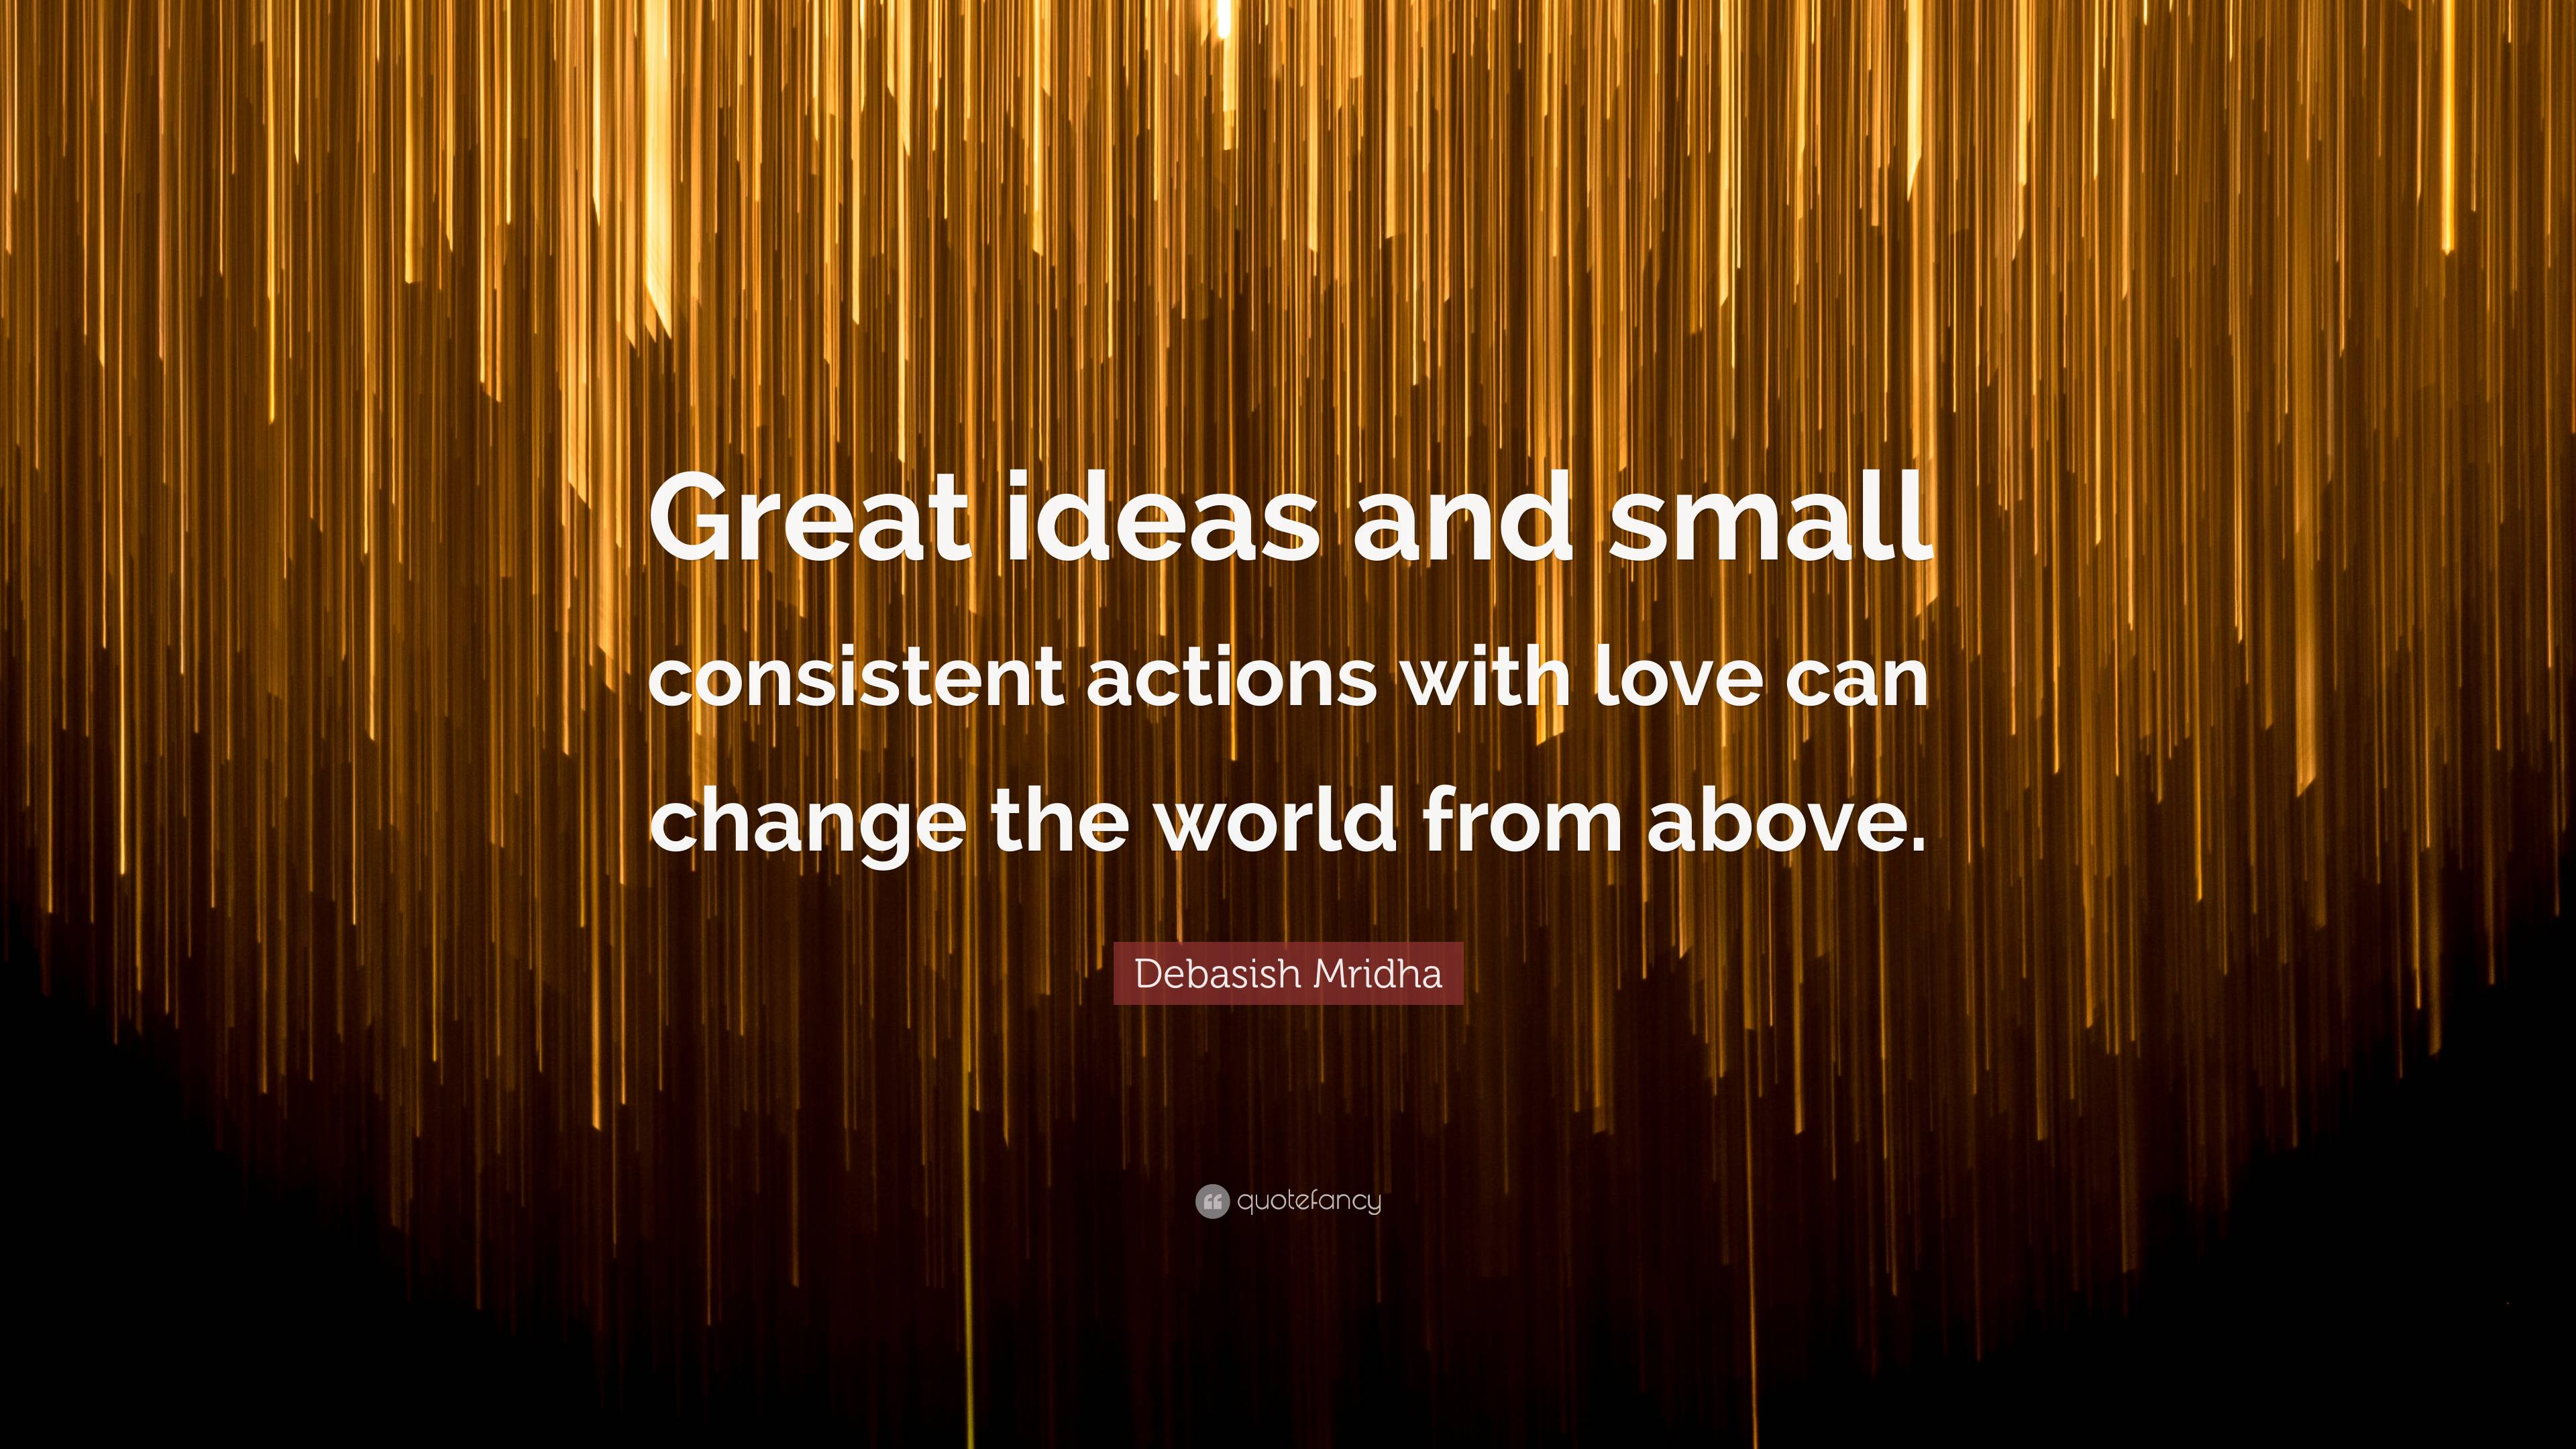 Debasish Mridha Quote: “Great ideas and small consistent actions with ...